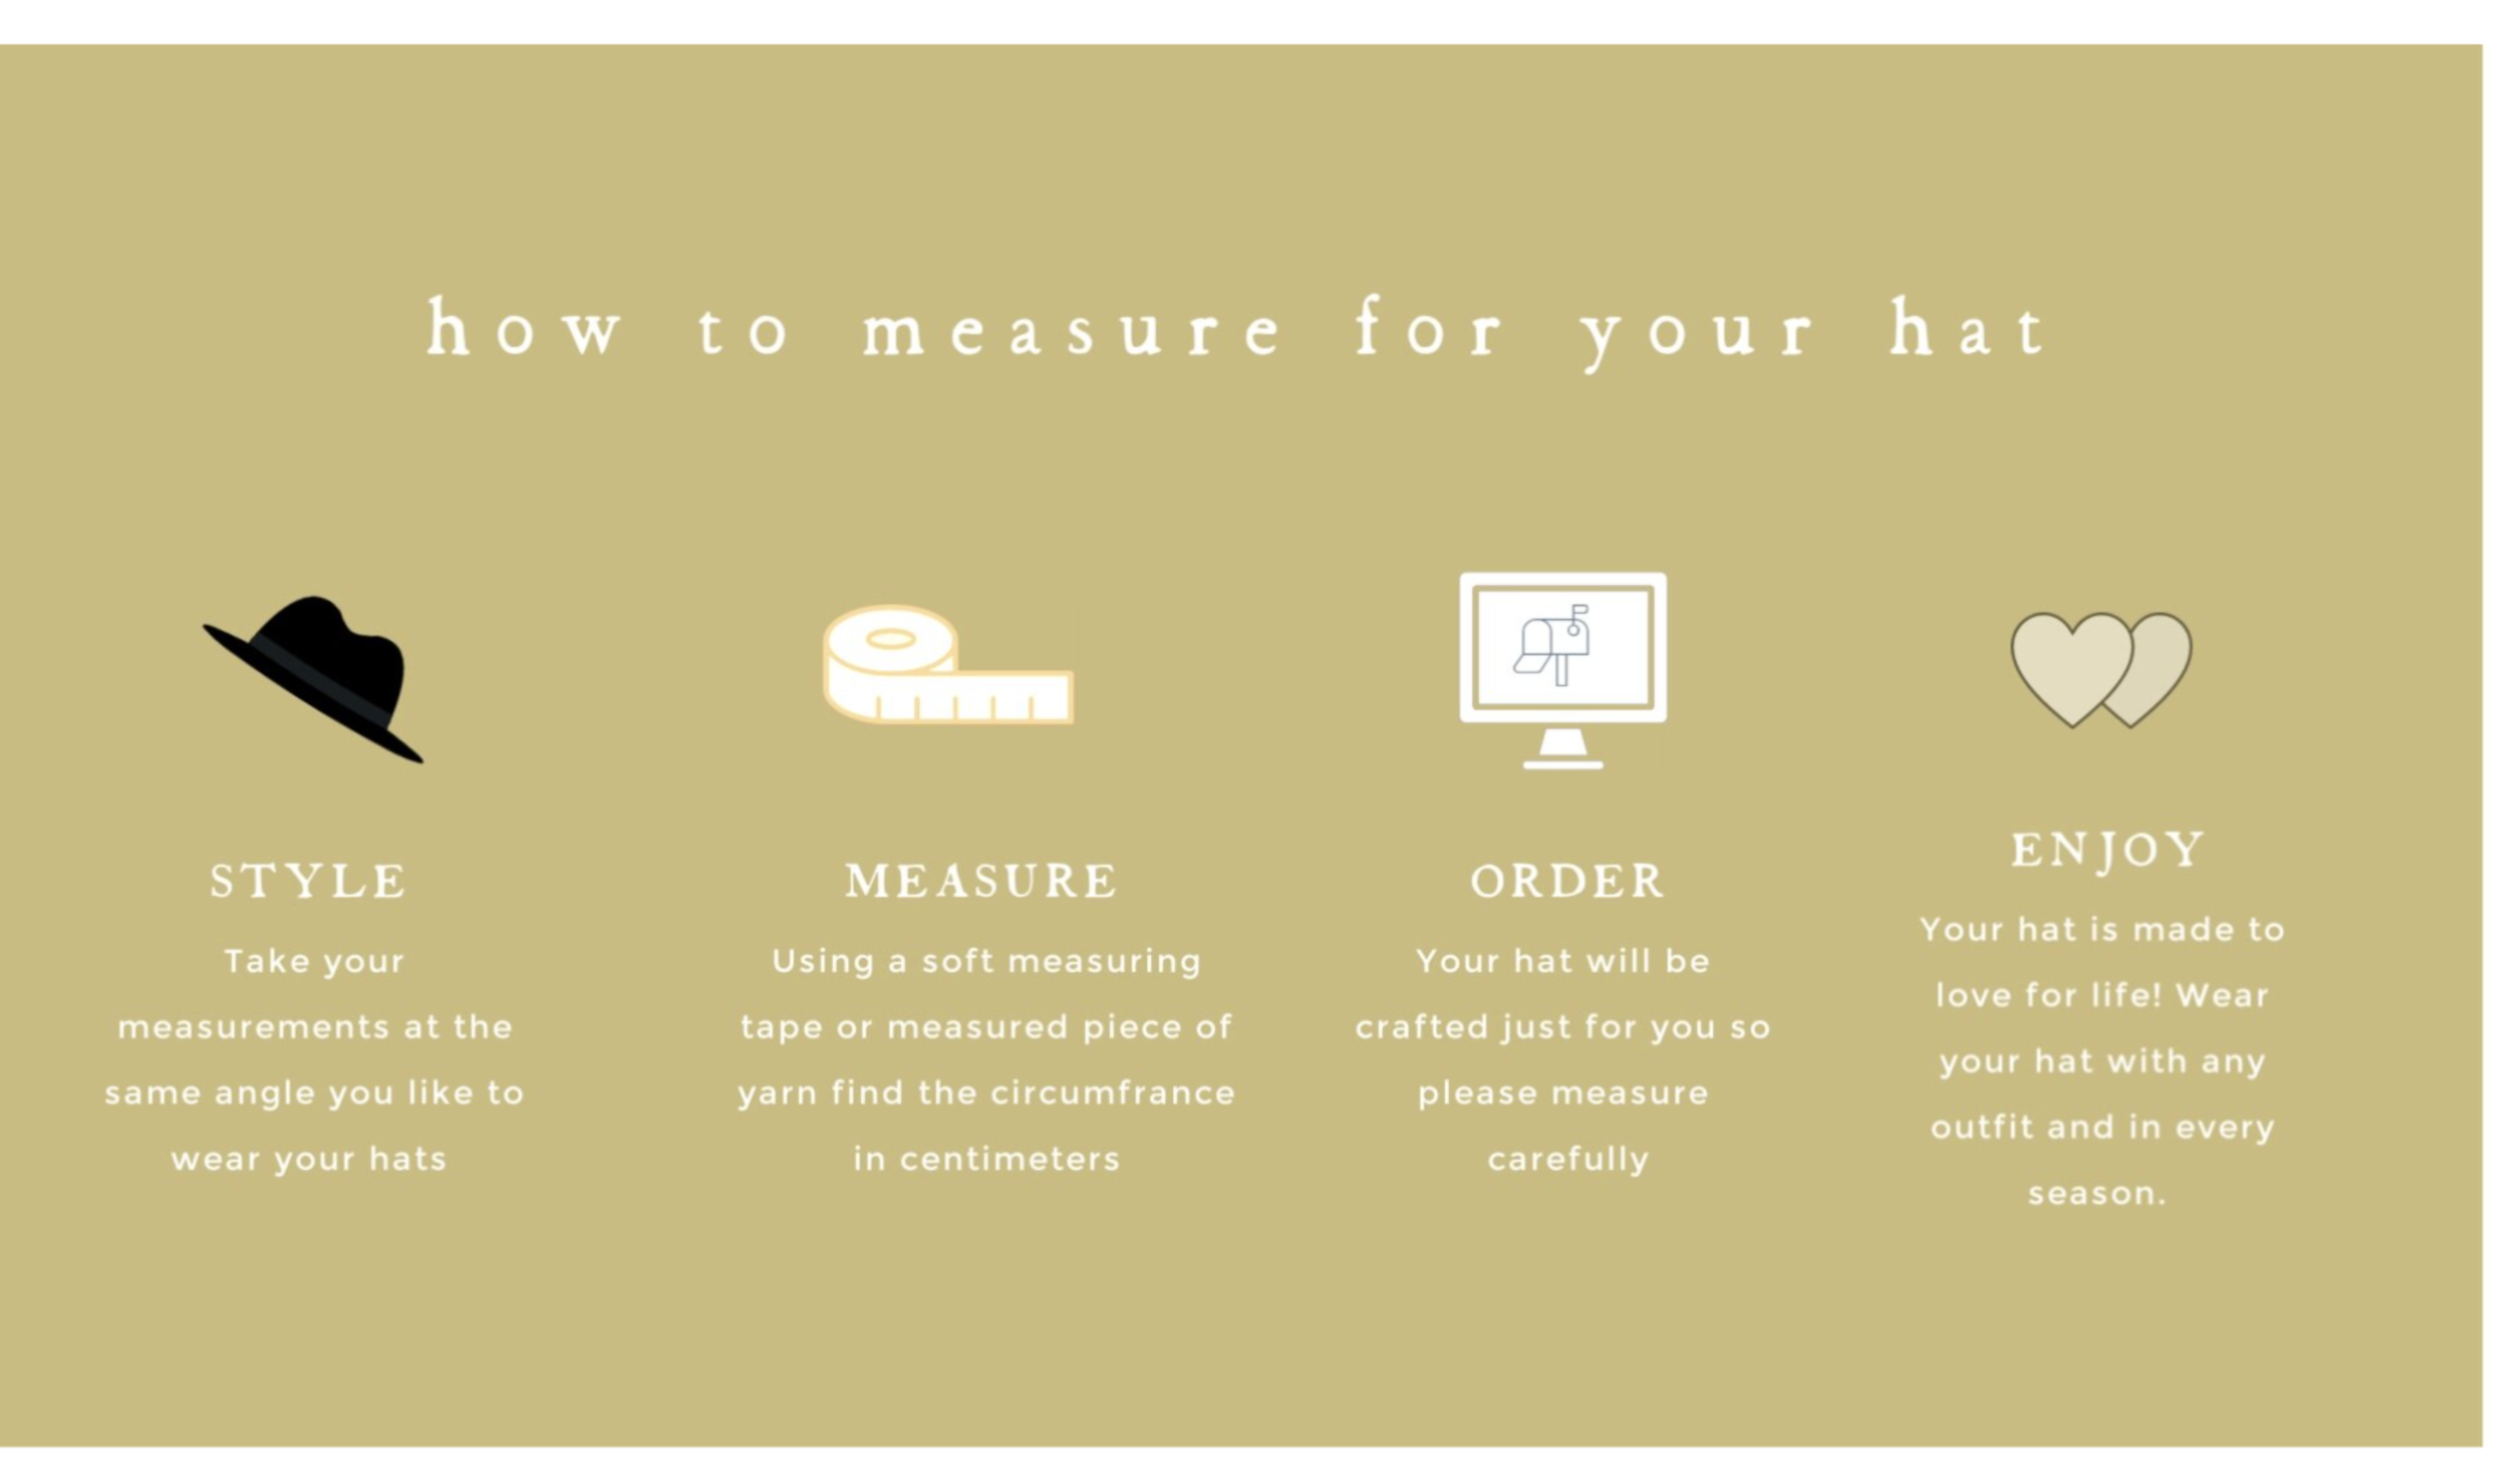 How to Measure for Your Hat Instructions